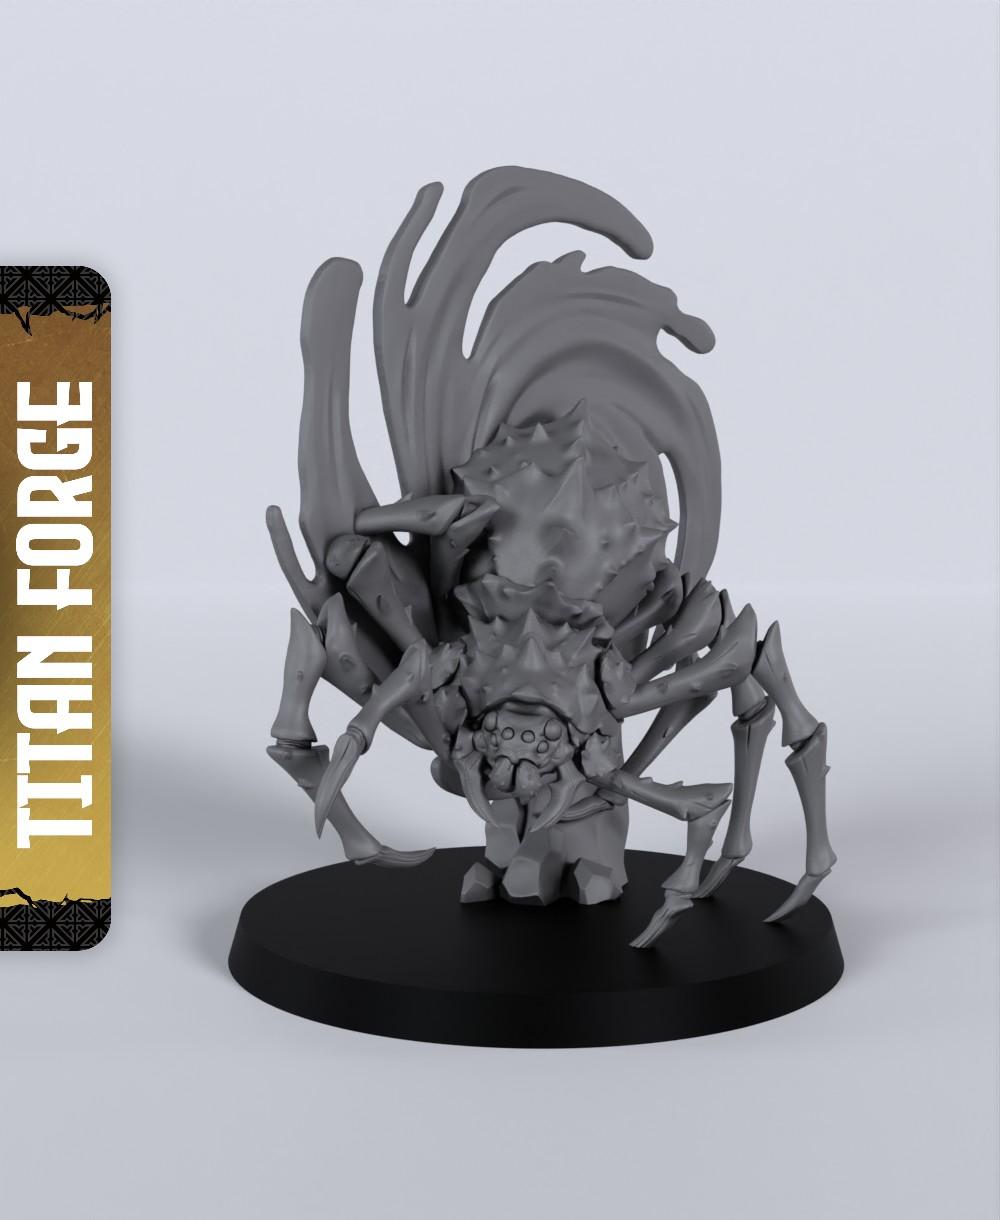 Phase Spider - With Free Dragon Warhammer - 5e DnD Inspired for RPG and Wargamers 3d model